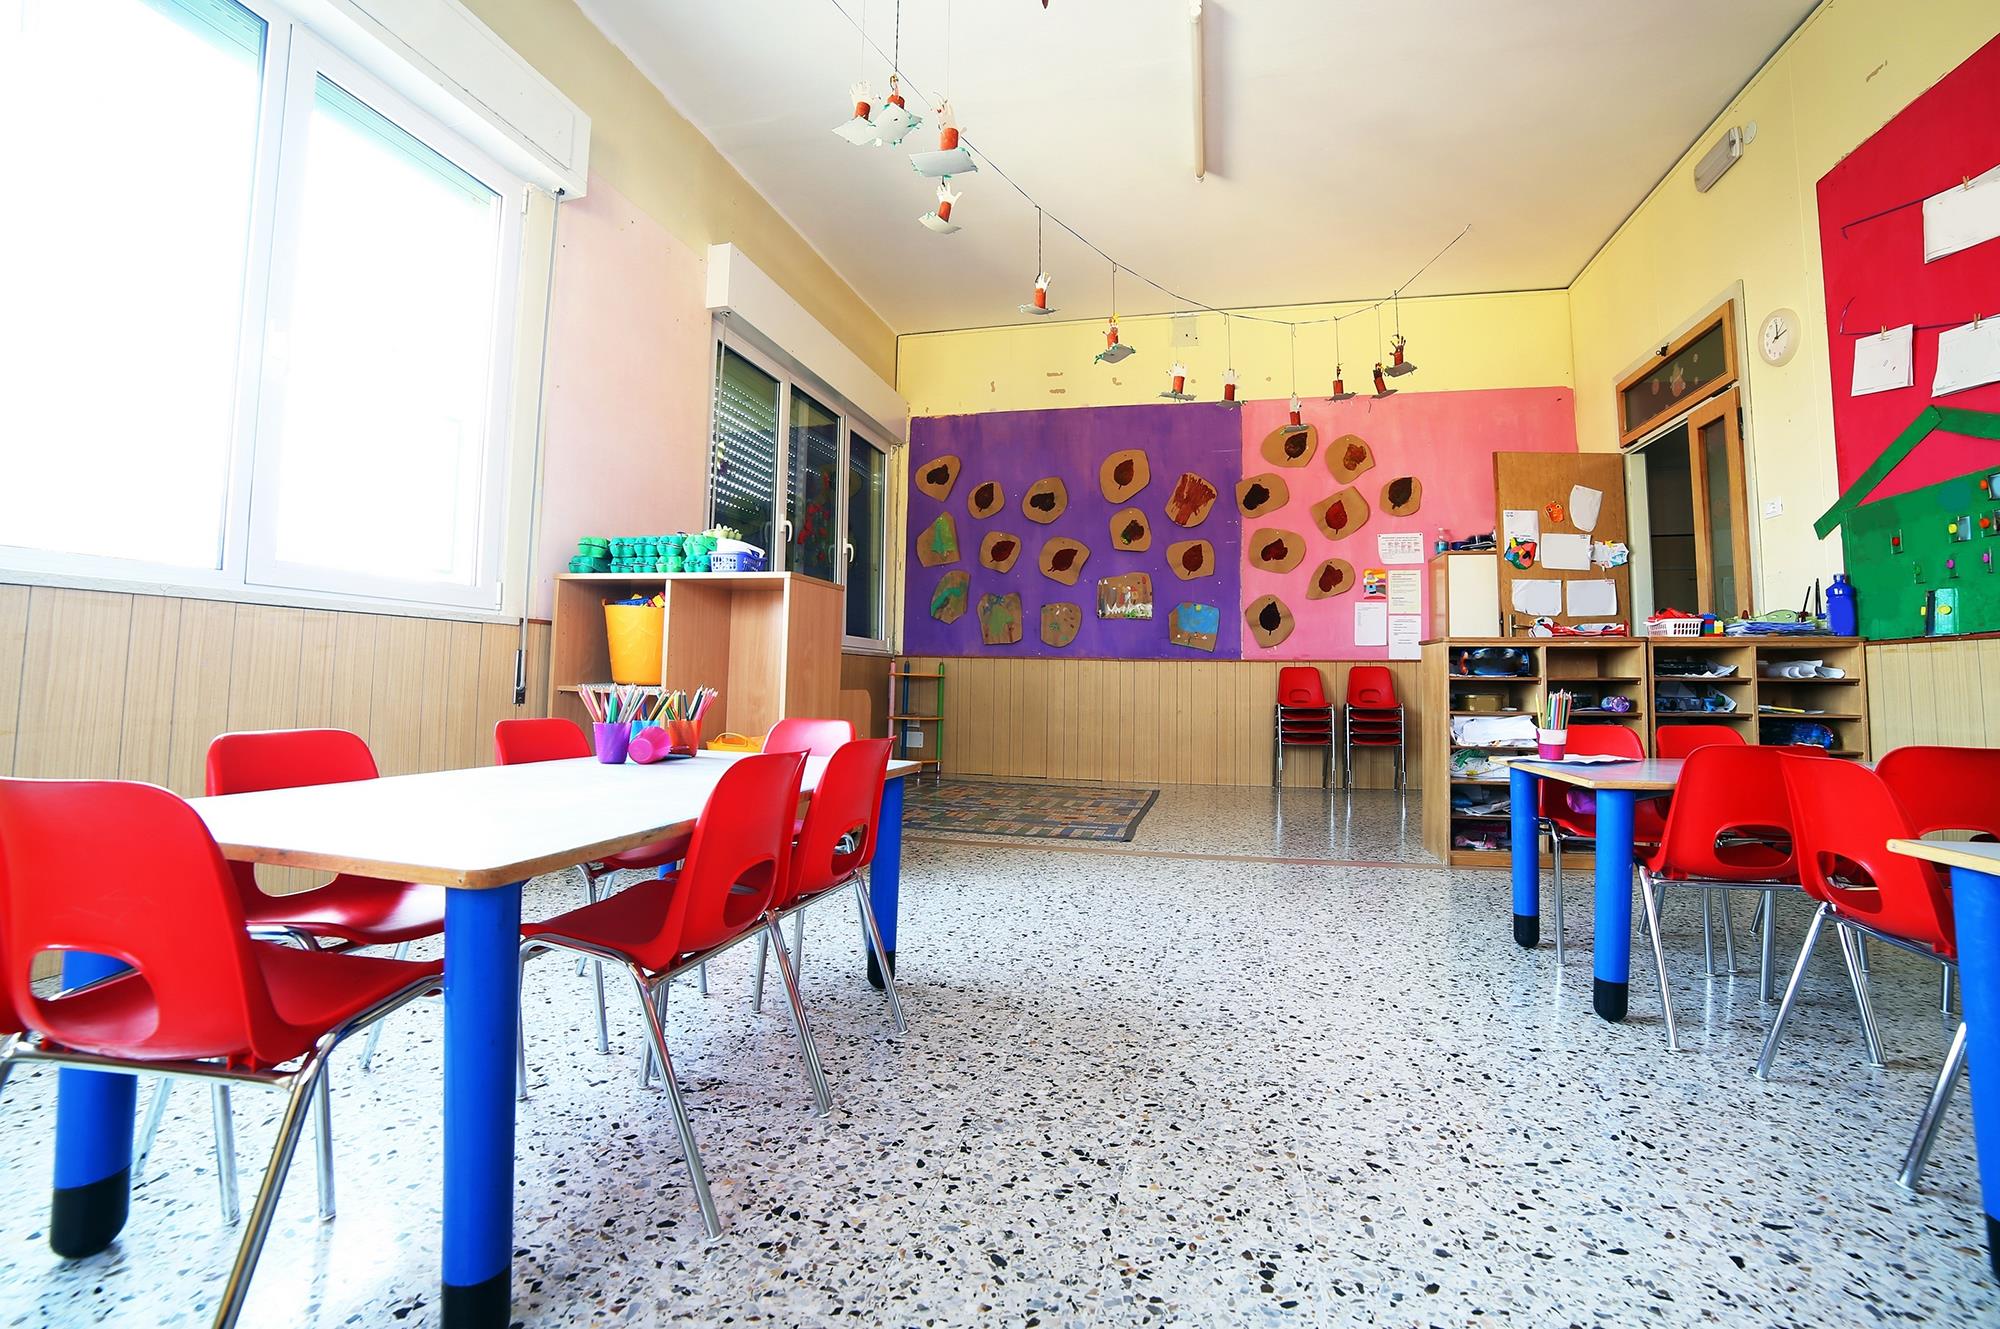 Room in a daycare with chairs and toys